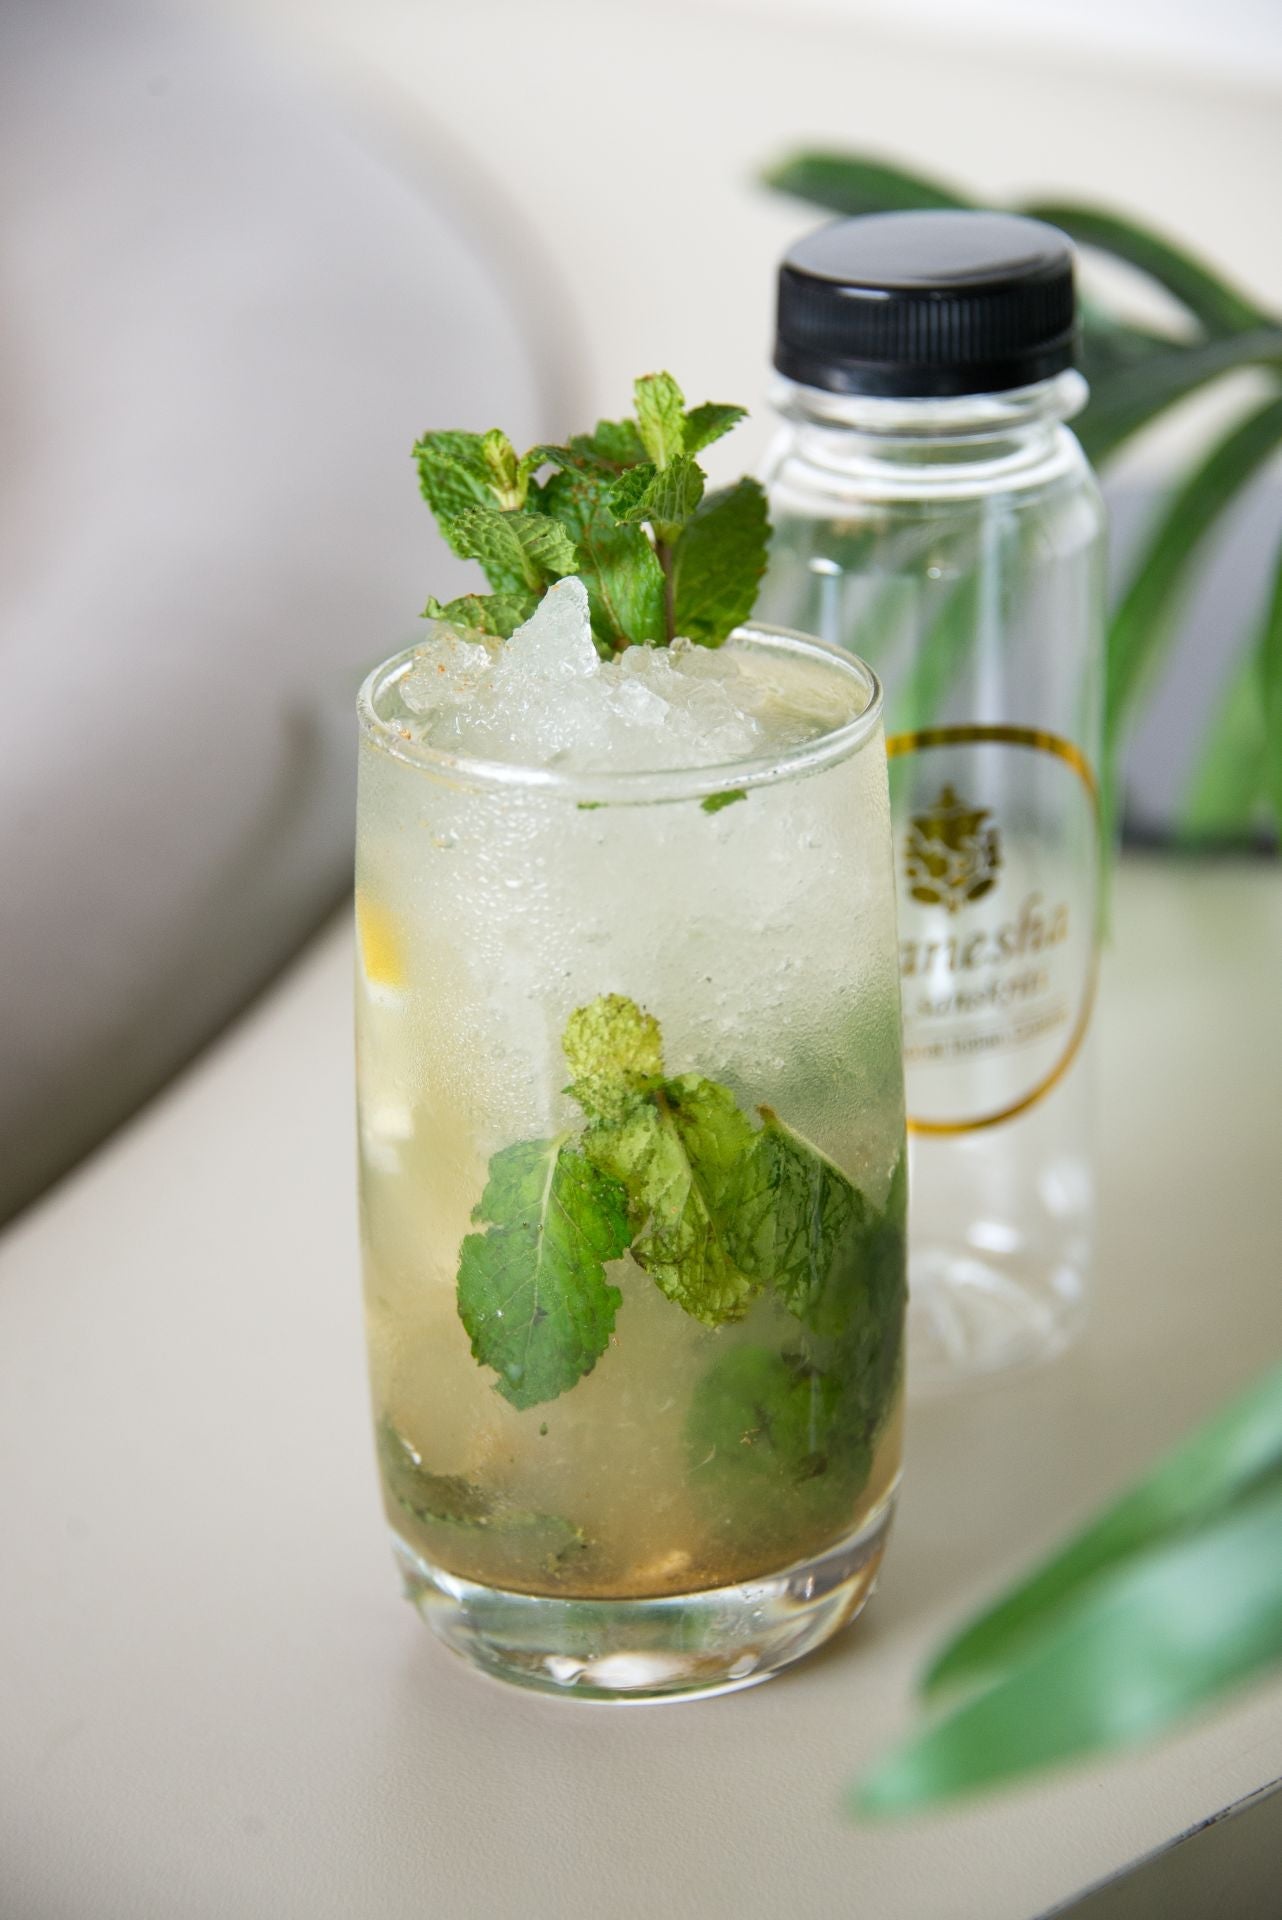 A refreshing glass of Ganesha Lemonade, a traditional Indian lemonade with a twist of mint